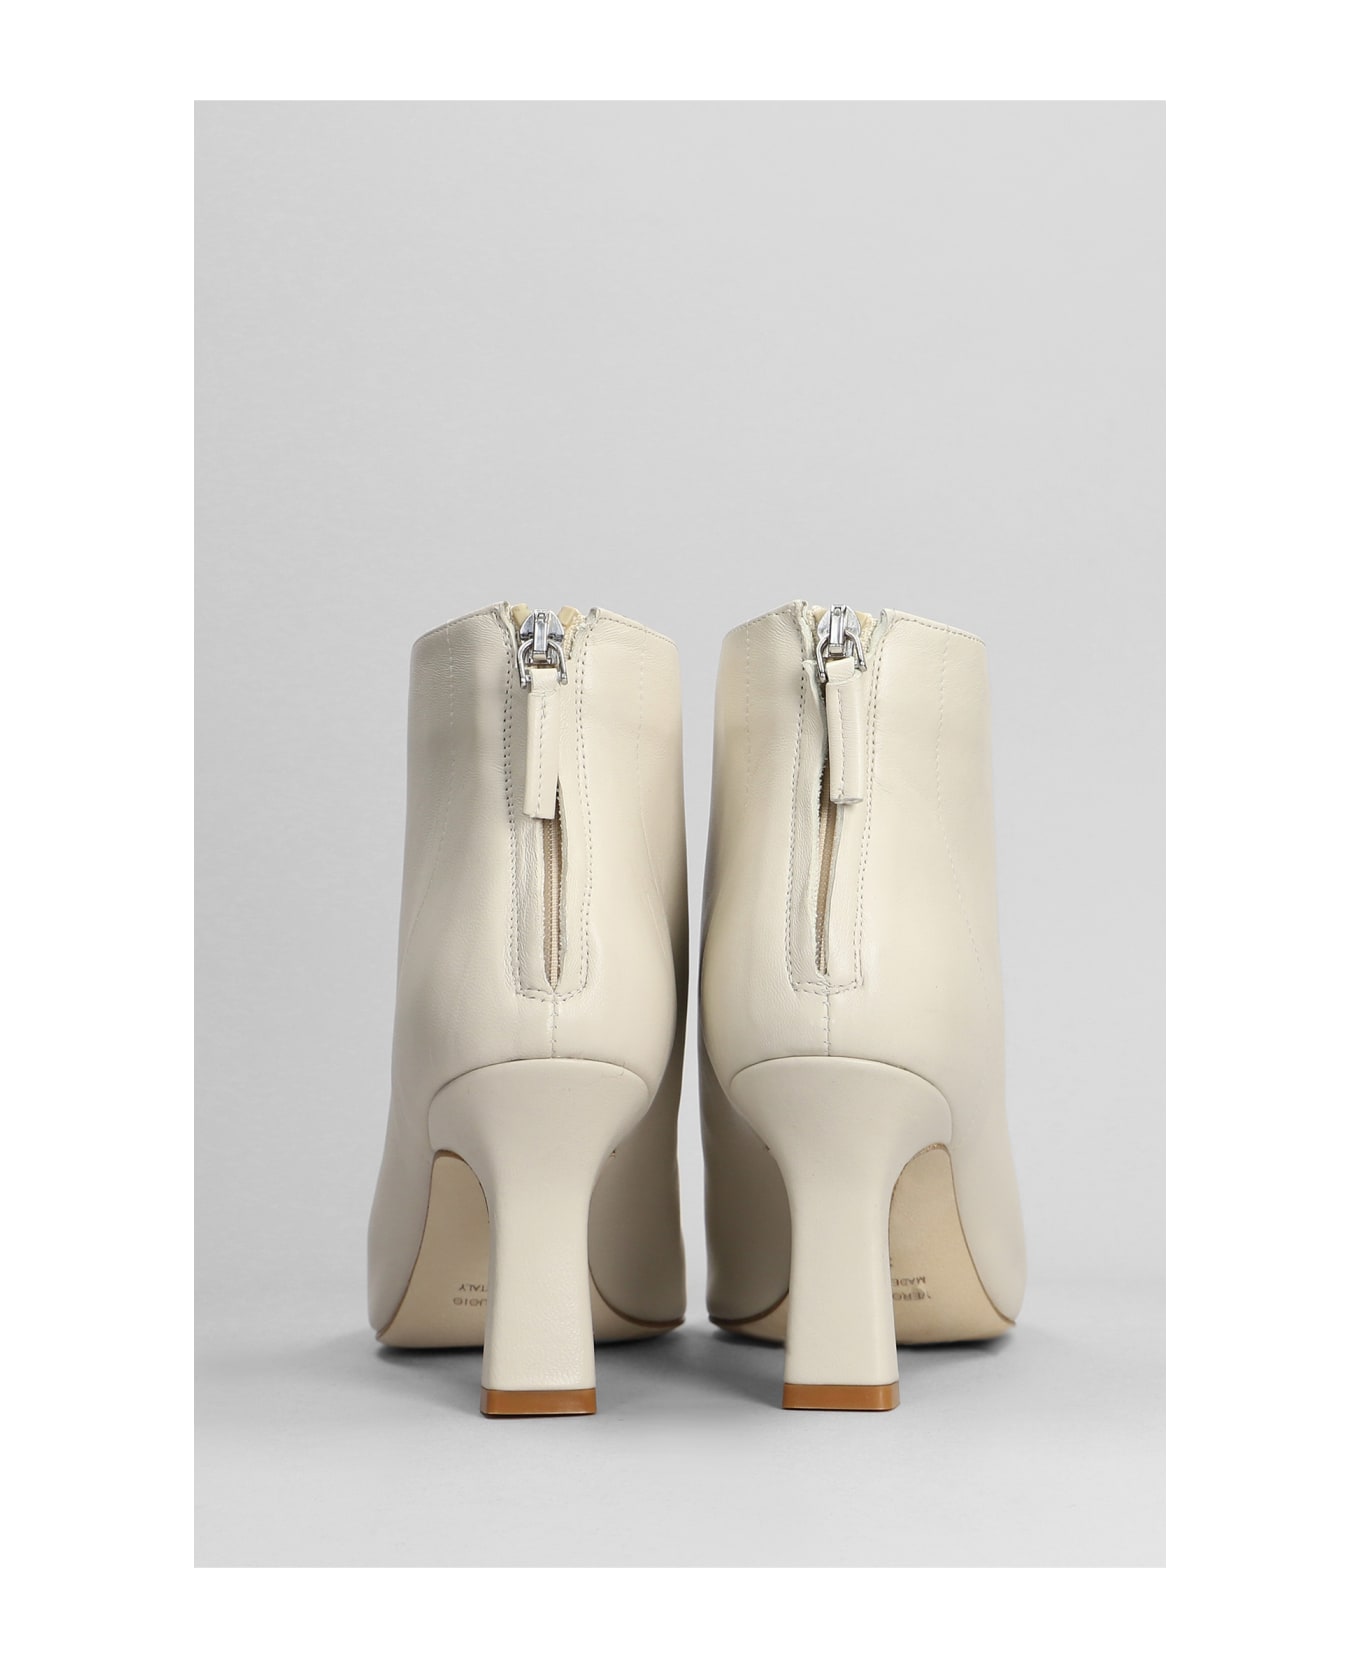 The Seller High Heels Ankle Boots In Beige Leather - beige ブーツ